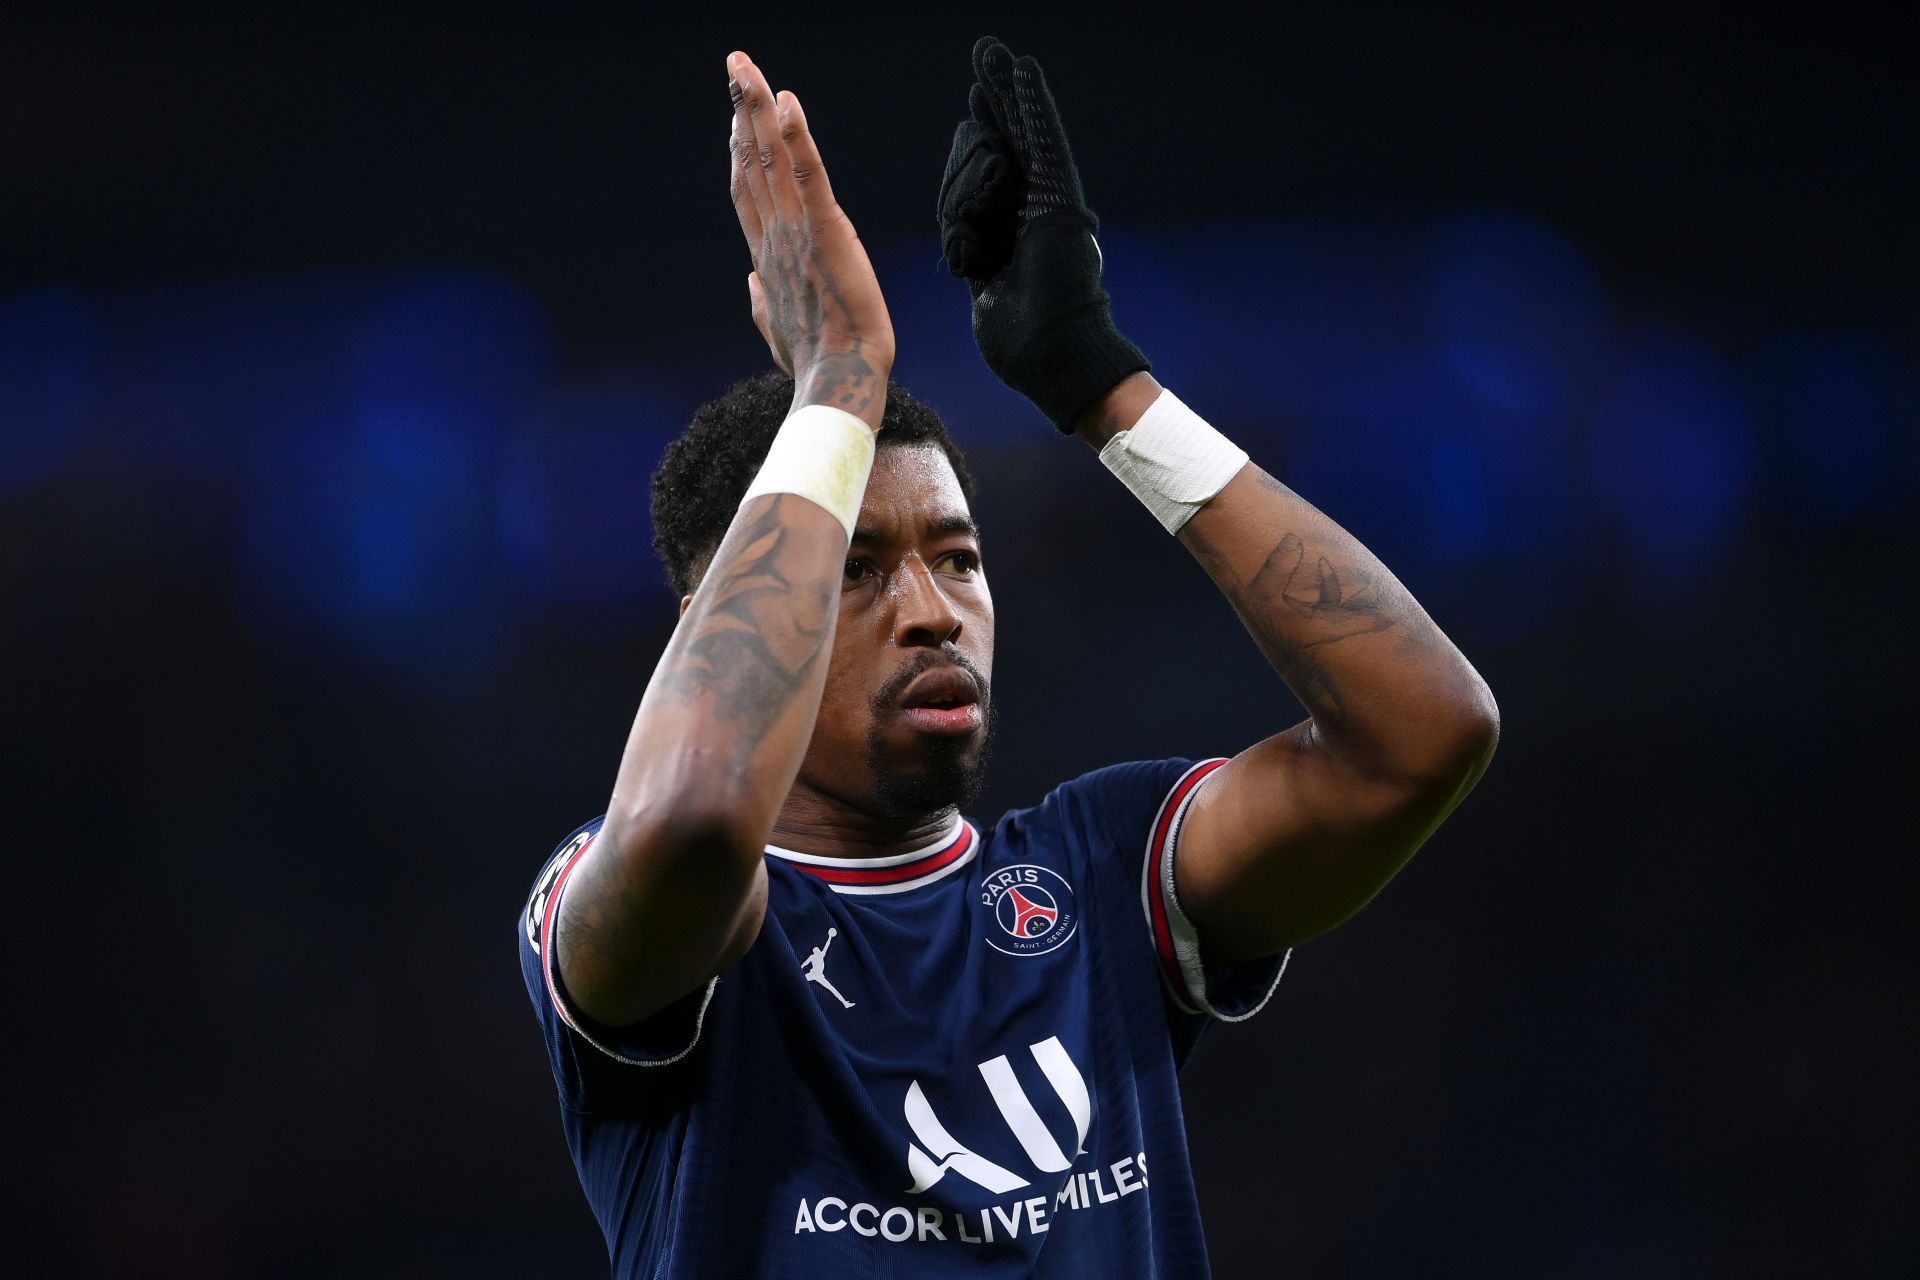 Presnel Kimpembe is ready to move to the Premier League, as per reports.